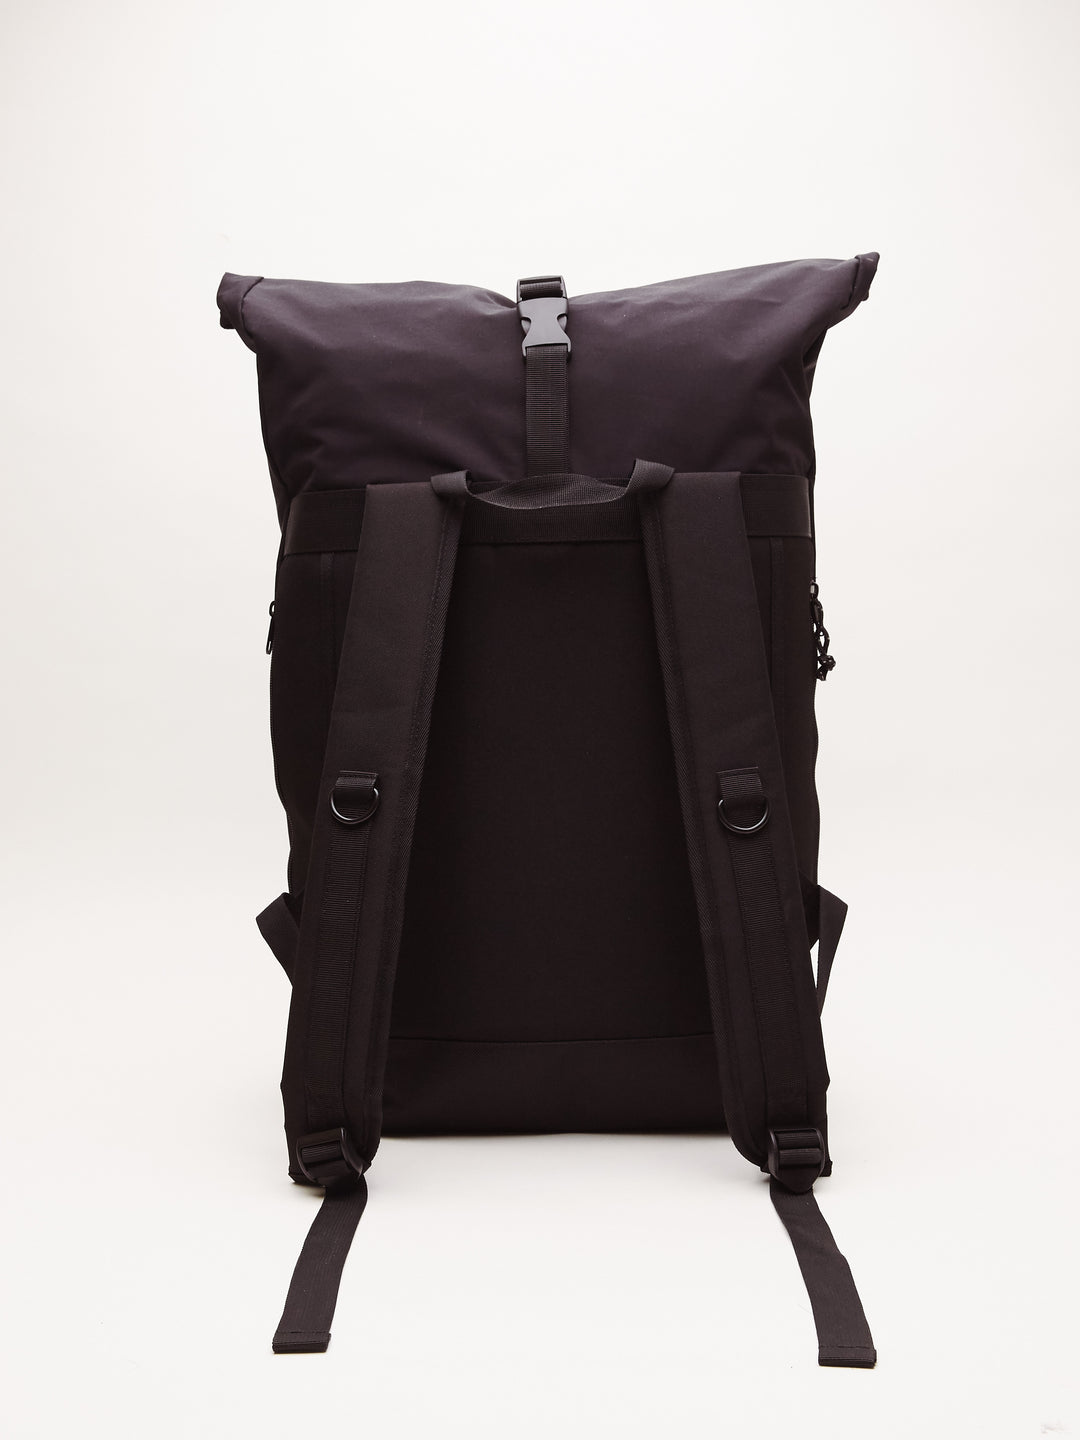 Conditions Rolltop Bag / Black - Main Image Number 3 of 3